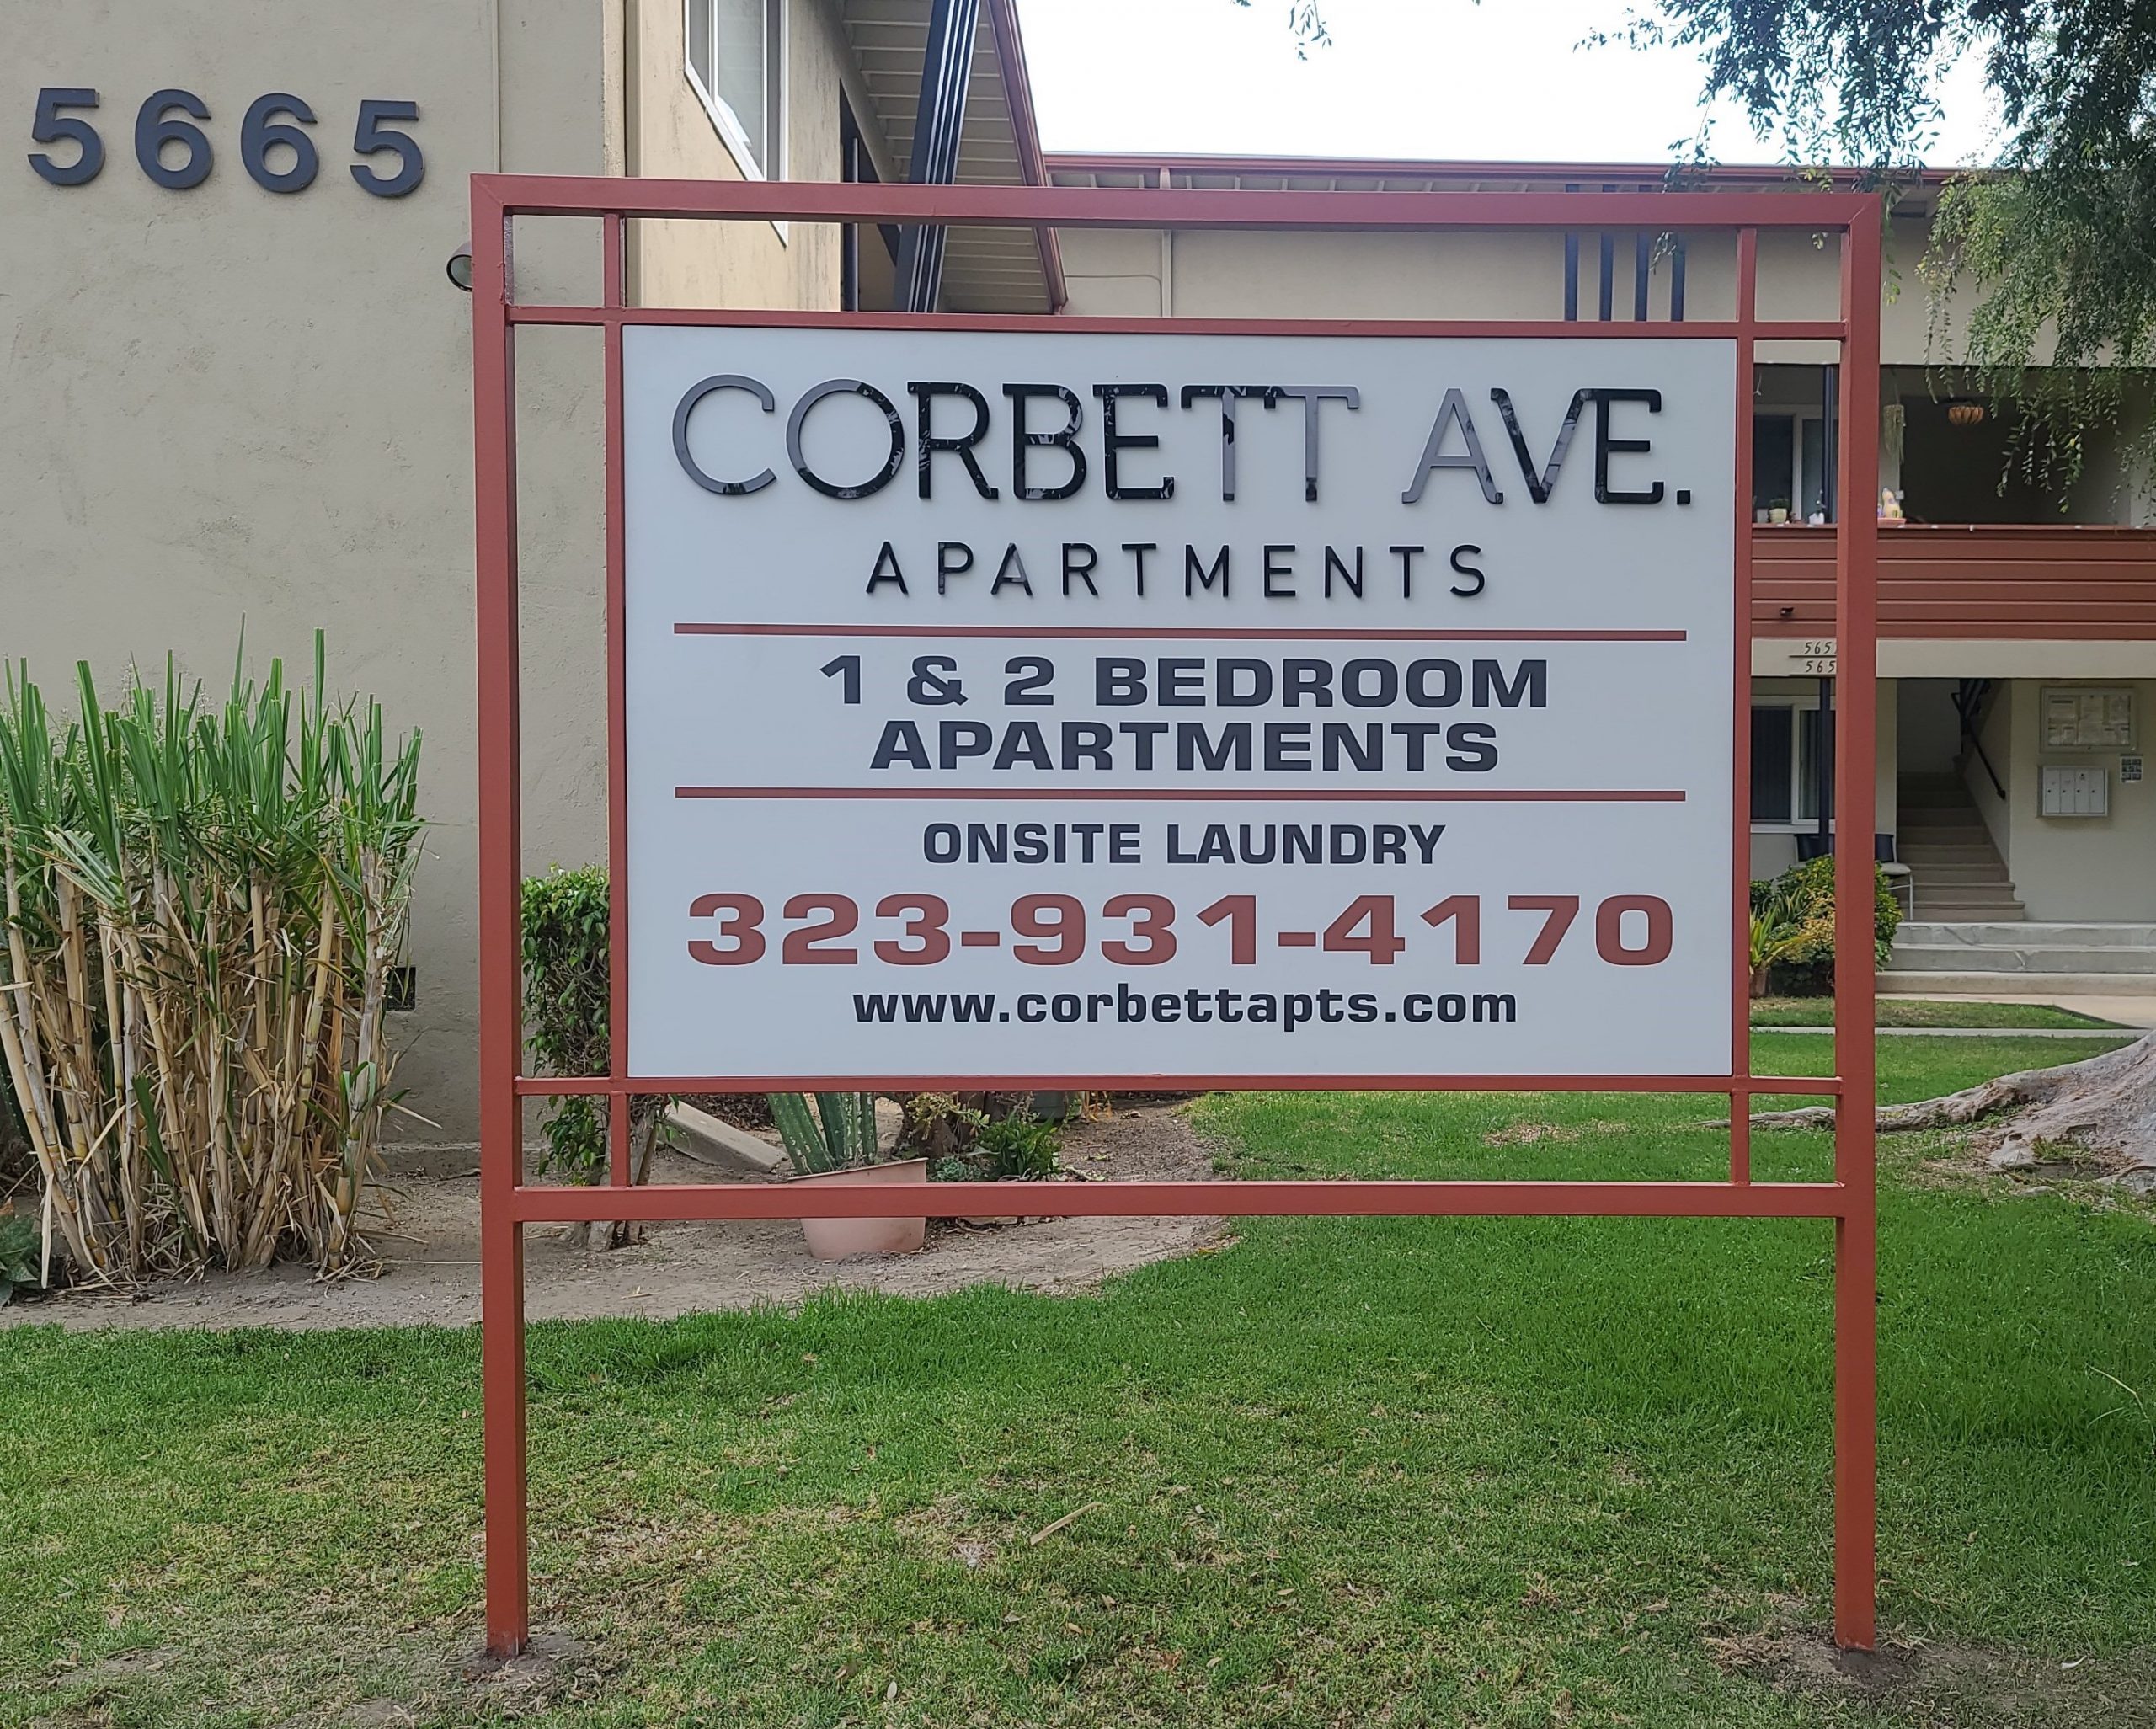 You are currently viewing Post and Panel Apartment Sign for Jones and Jones in Corbett Avenue, Los Angeles